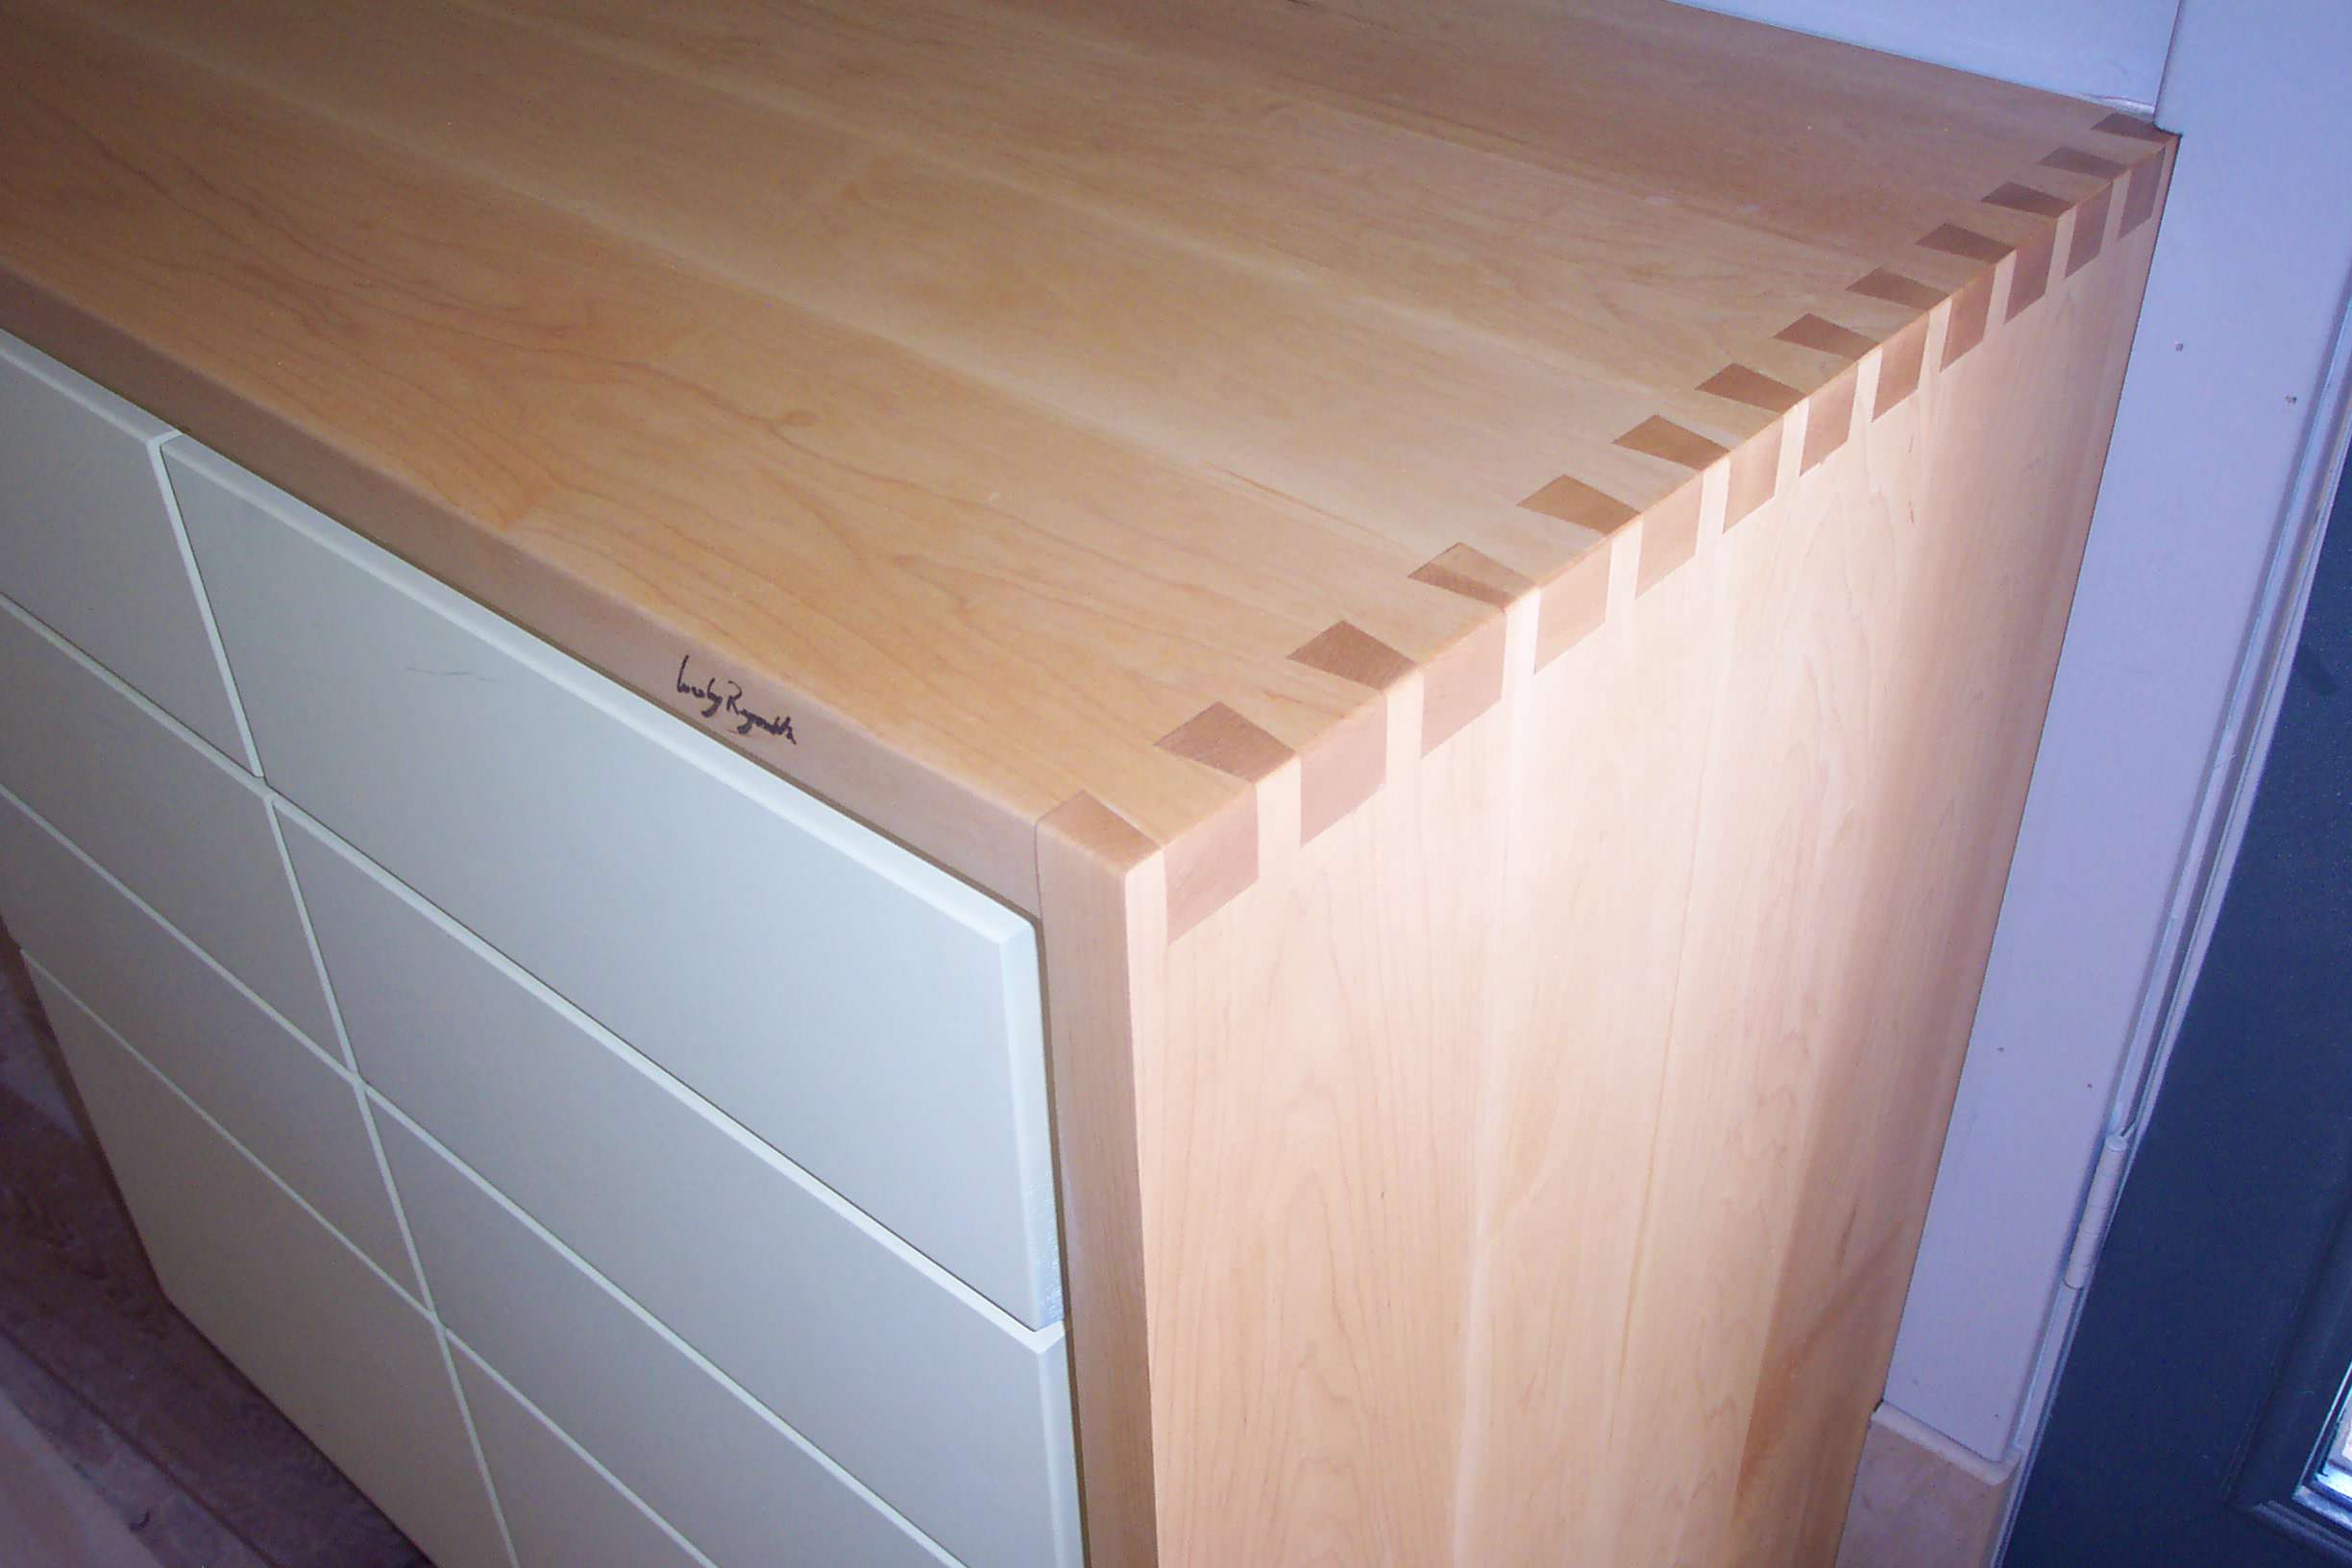 Maple counter top with dovetail edge detail